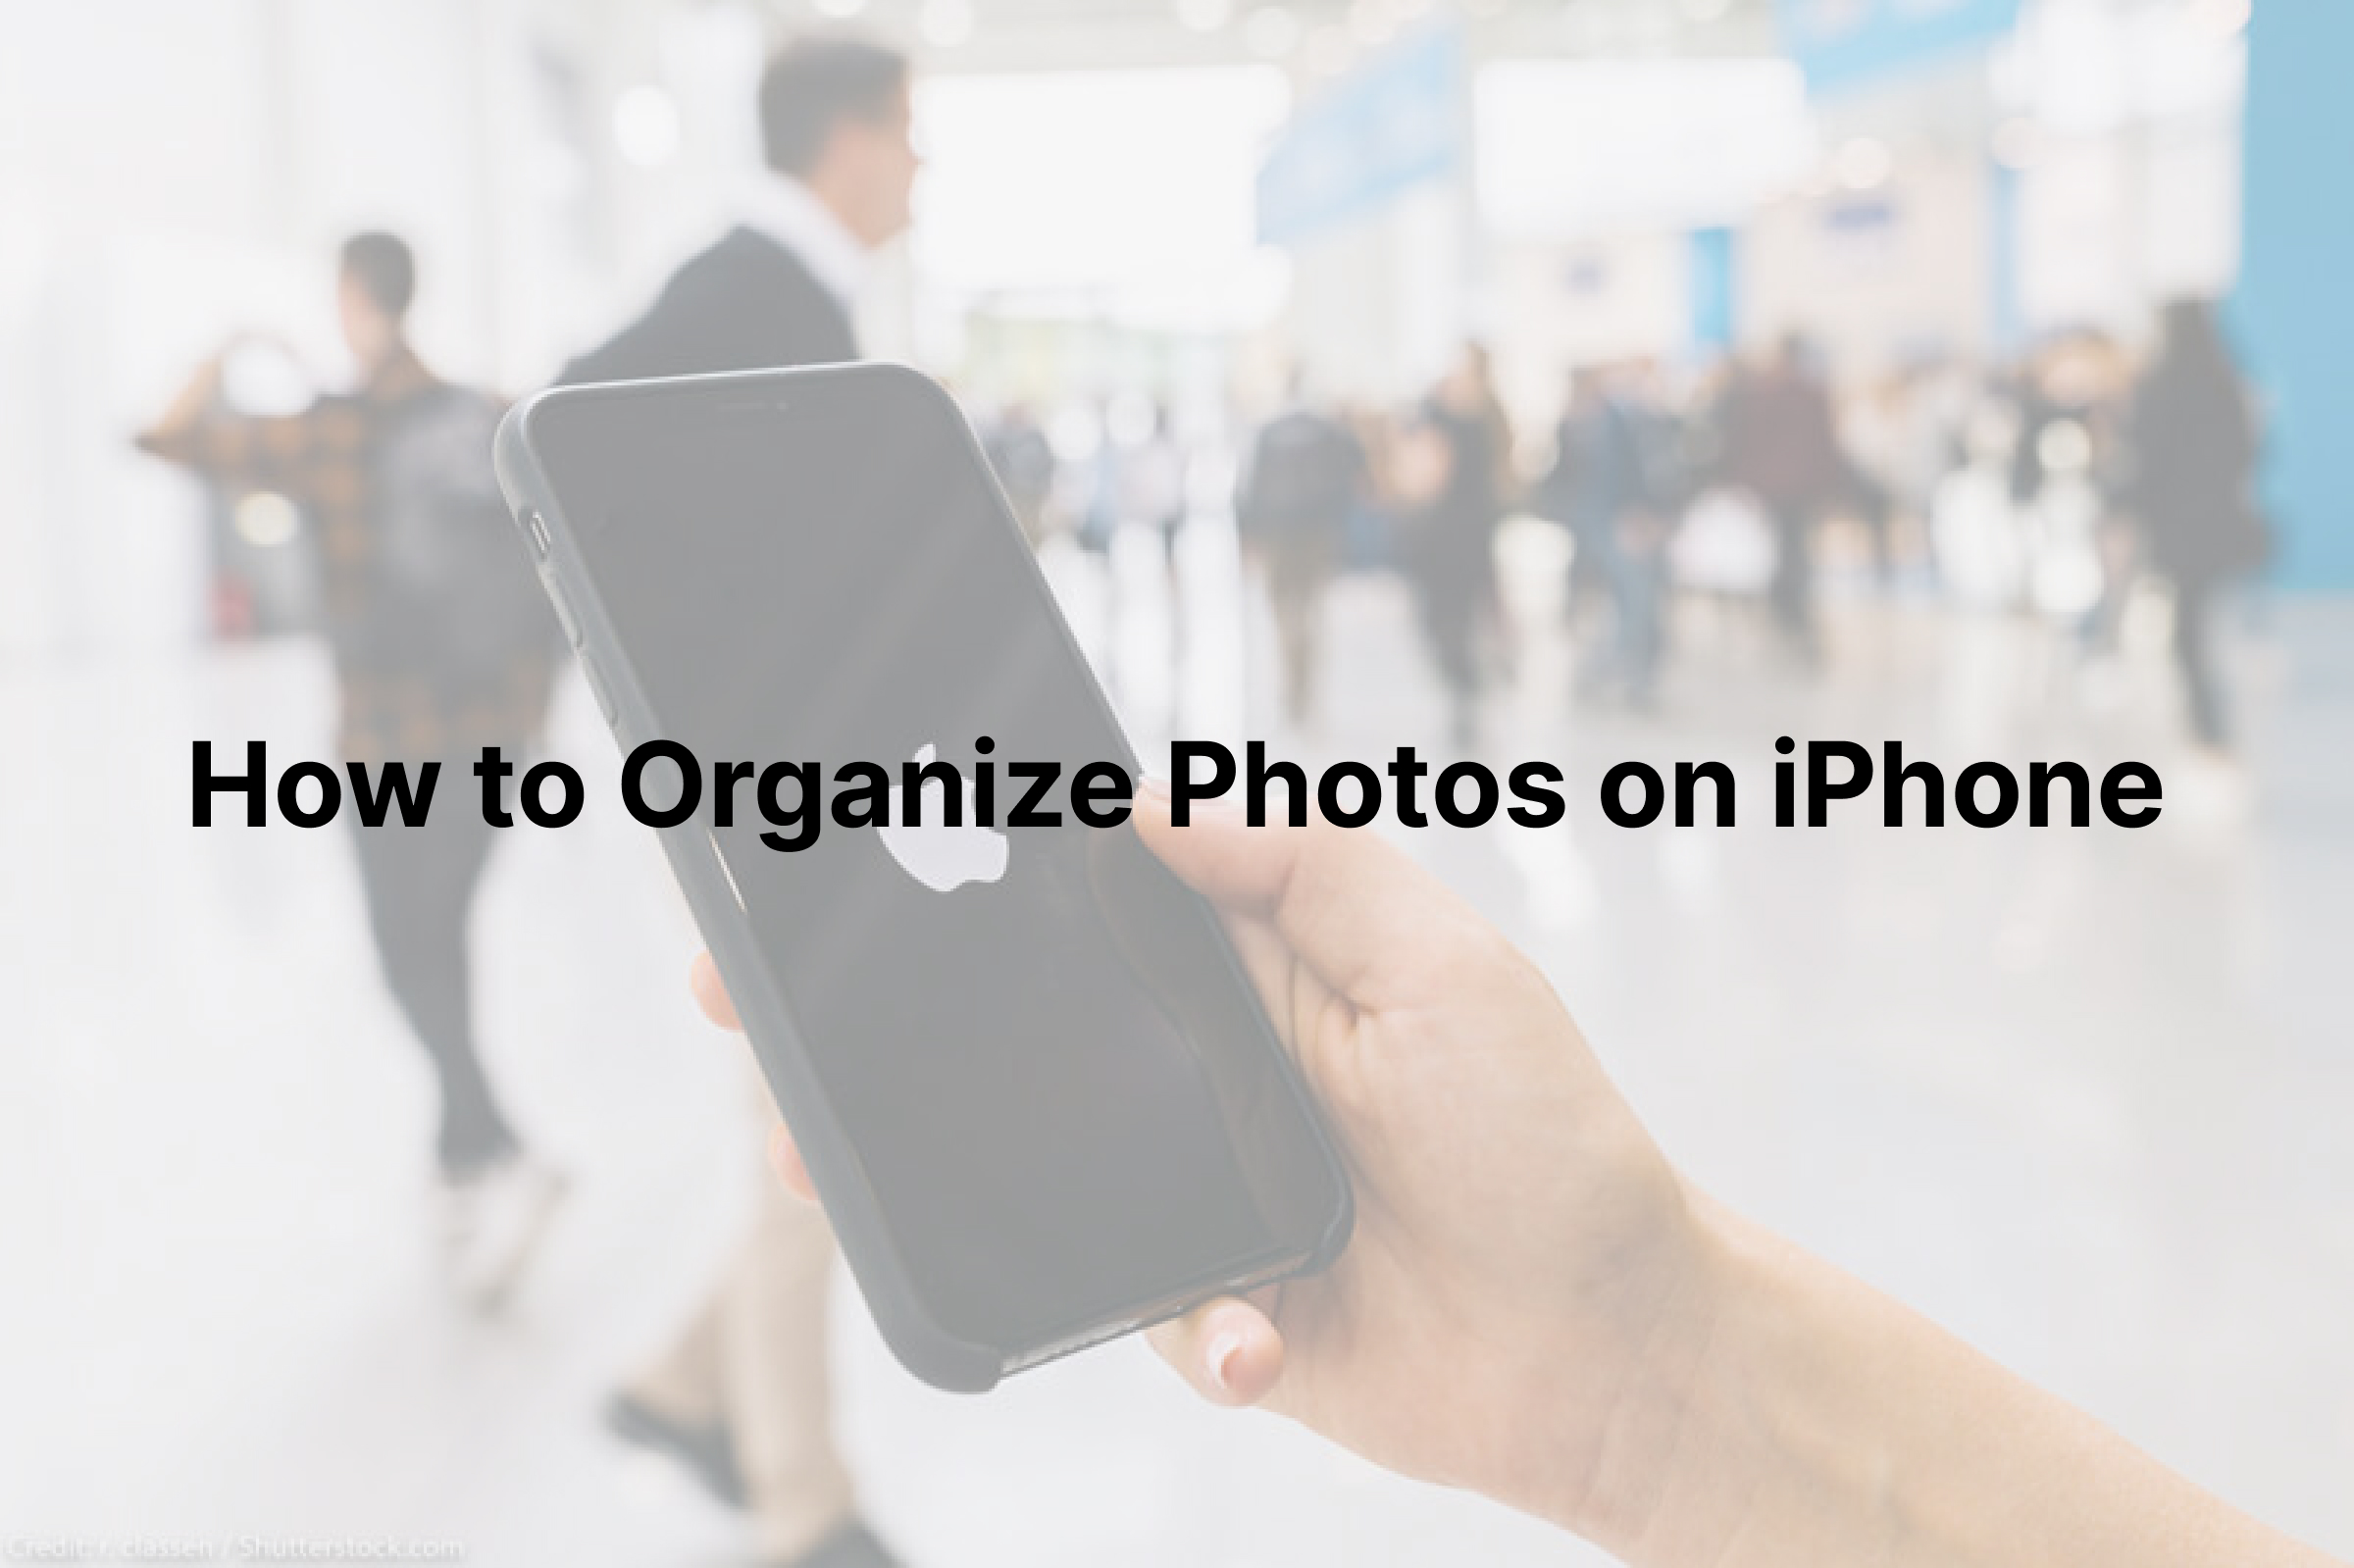 How to Organize Photos on iPhone?